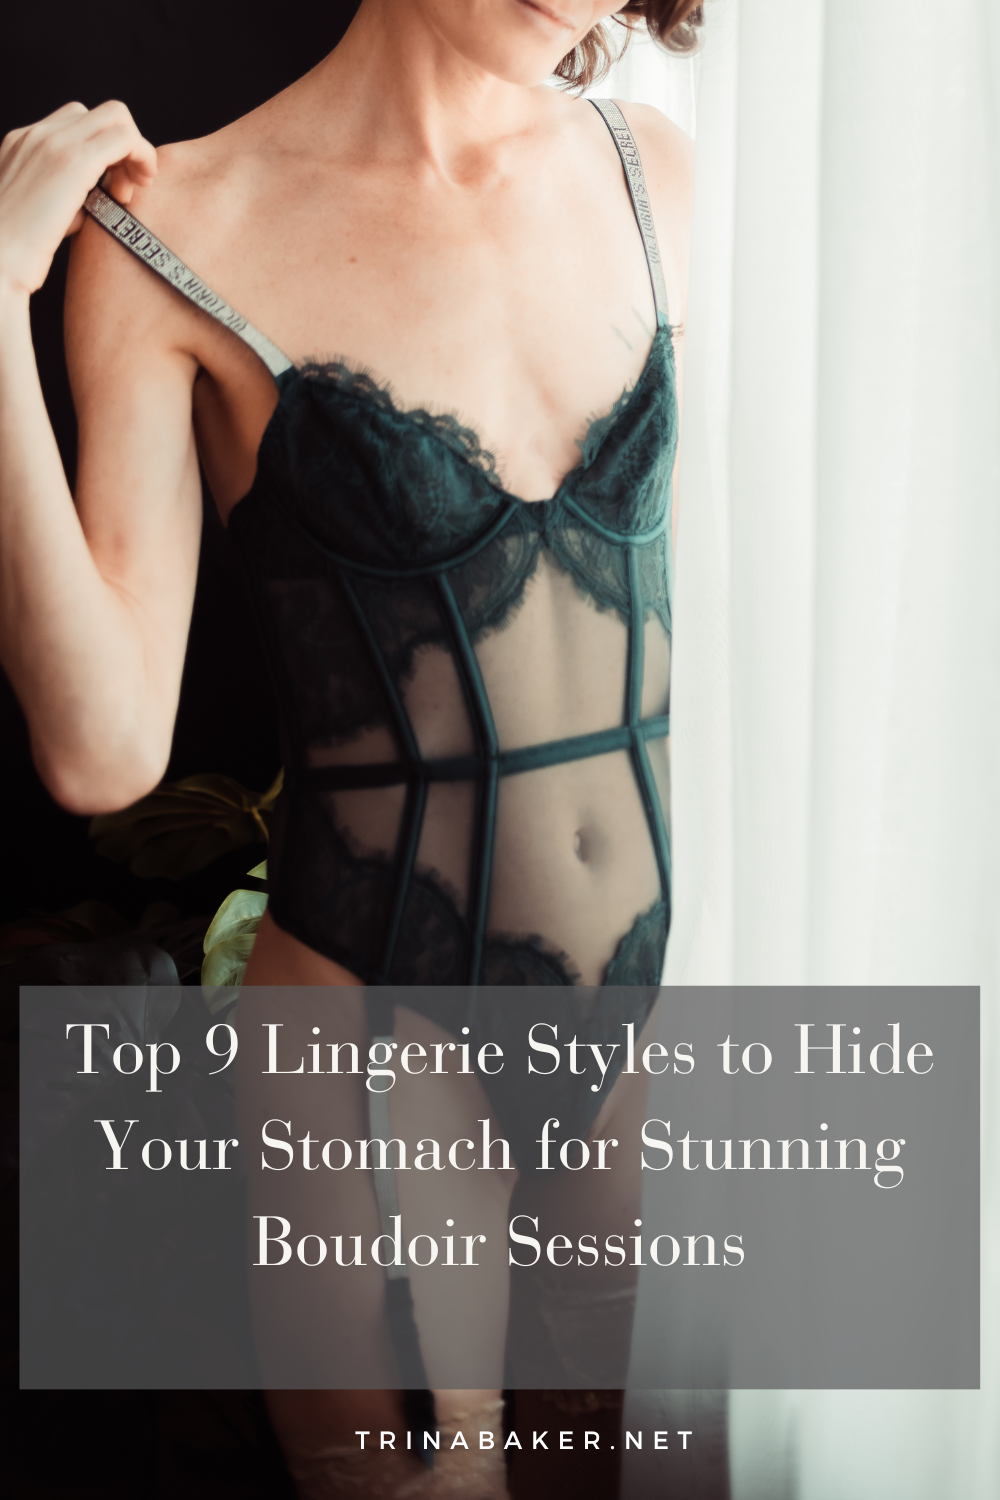 Top 9 Lingerie Styles to Hide Your Stomach for Stunning Boudoir